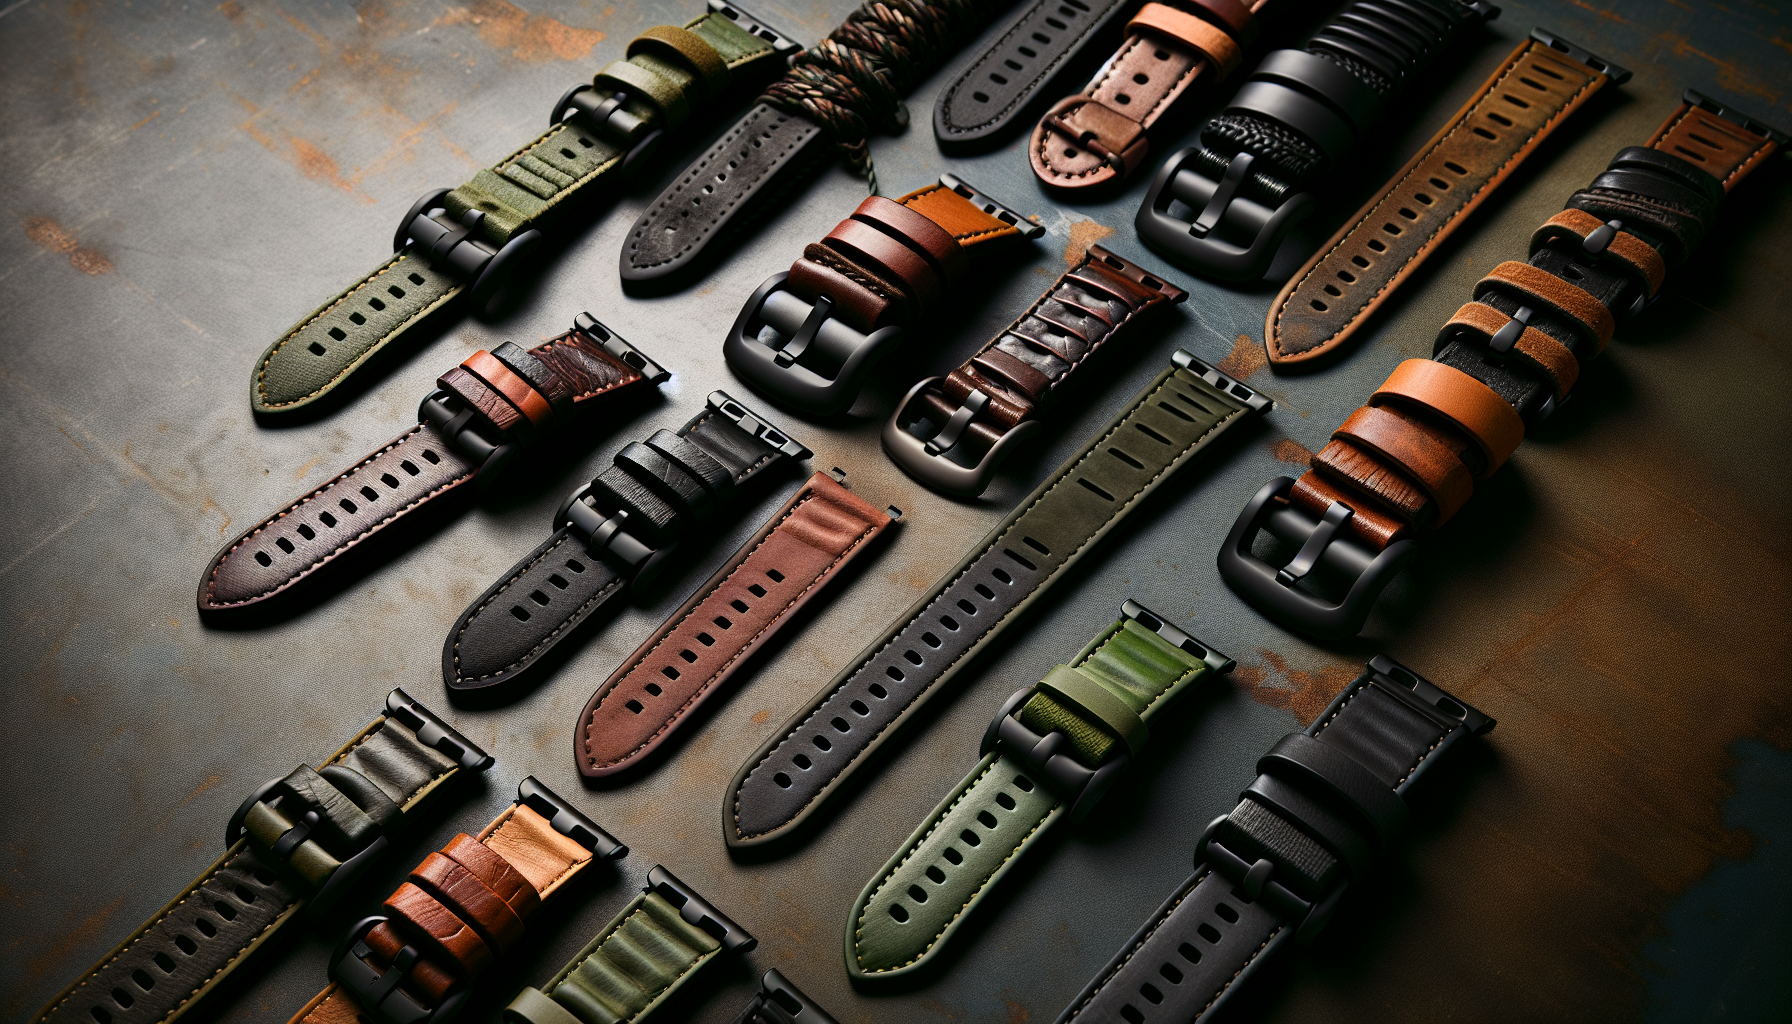 Selection of military watch bands in various colors including black, brown, and green